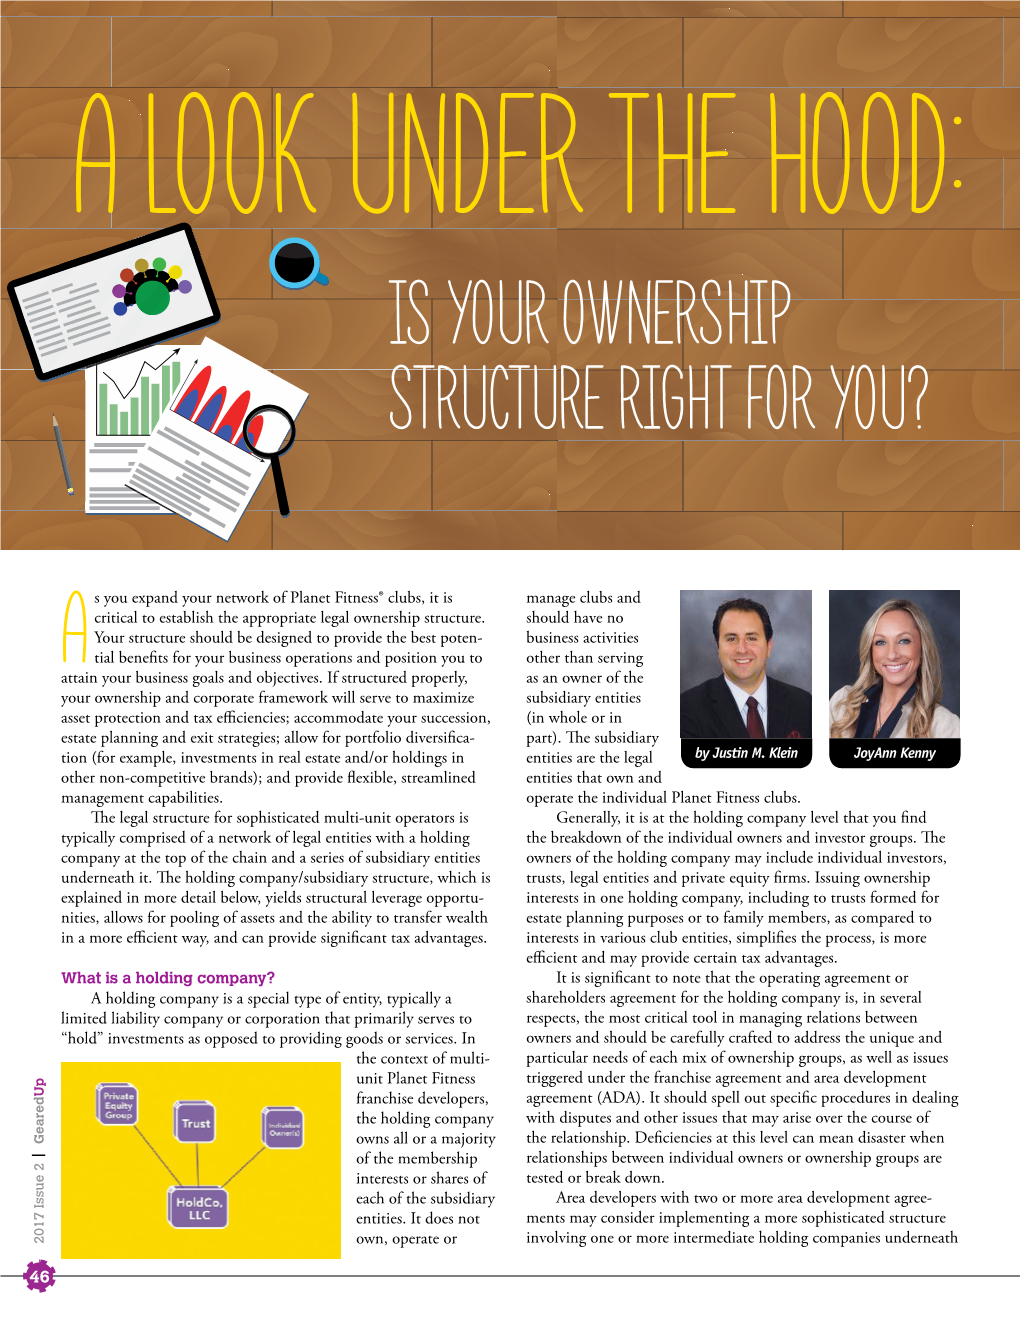 A Look Under the Hood: Is Your Ownership Structure Right for You?